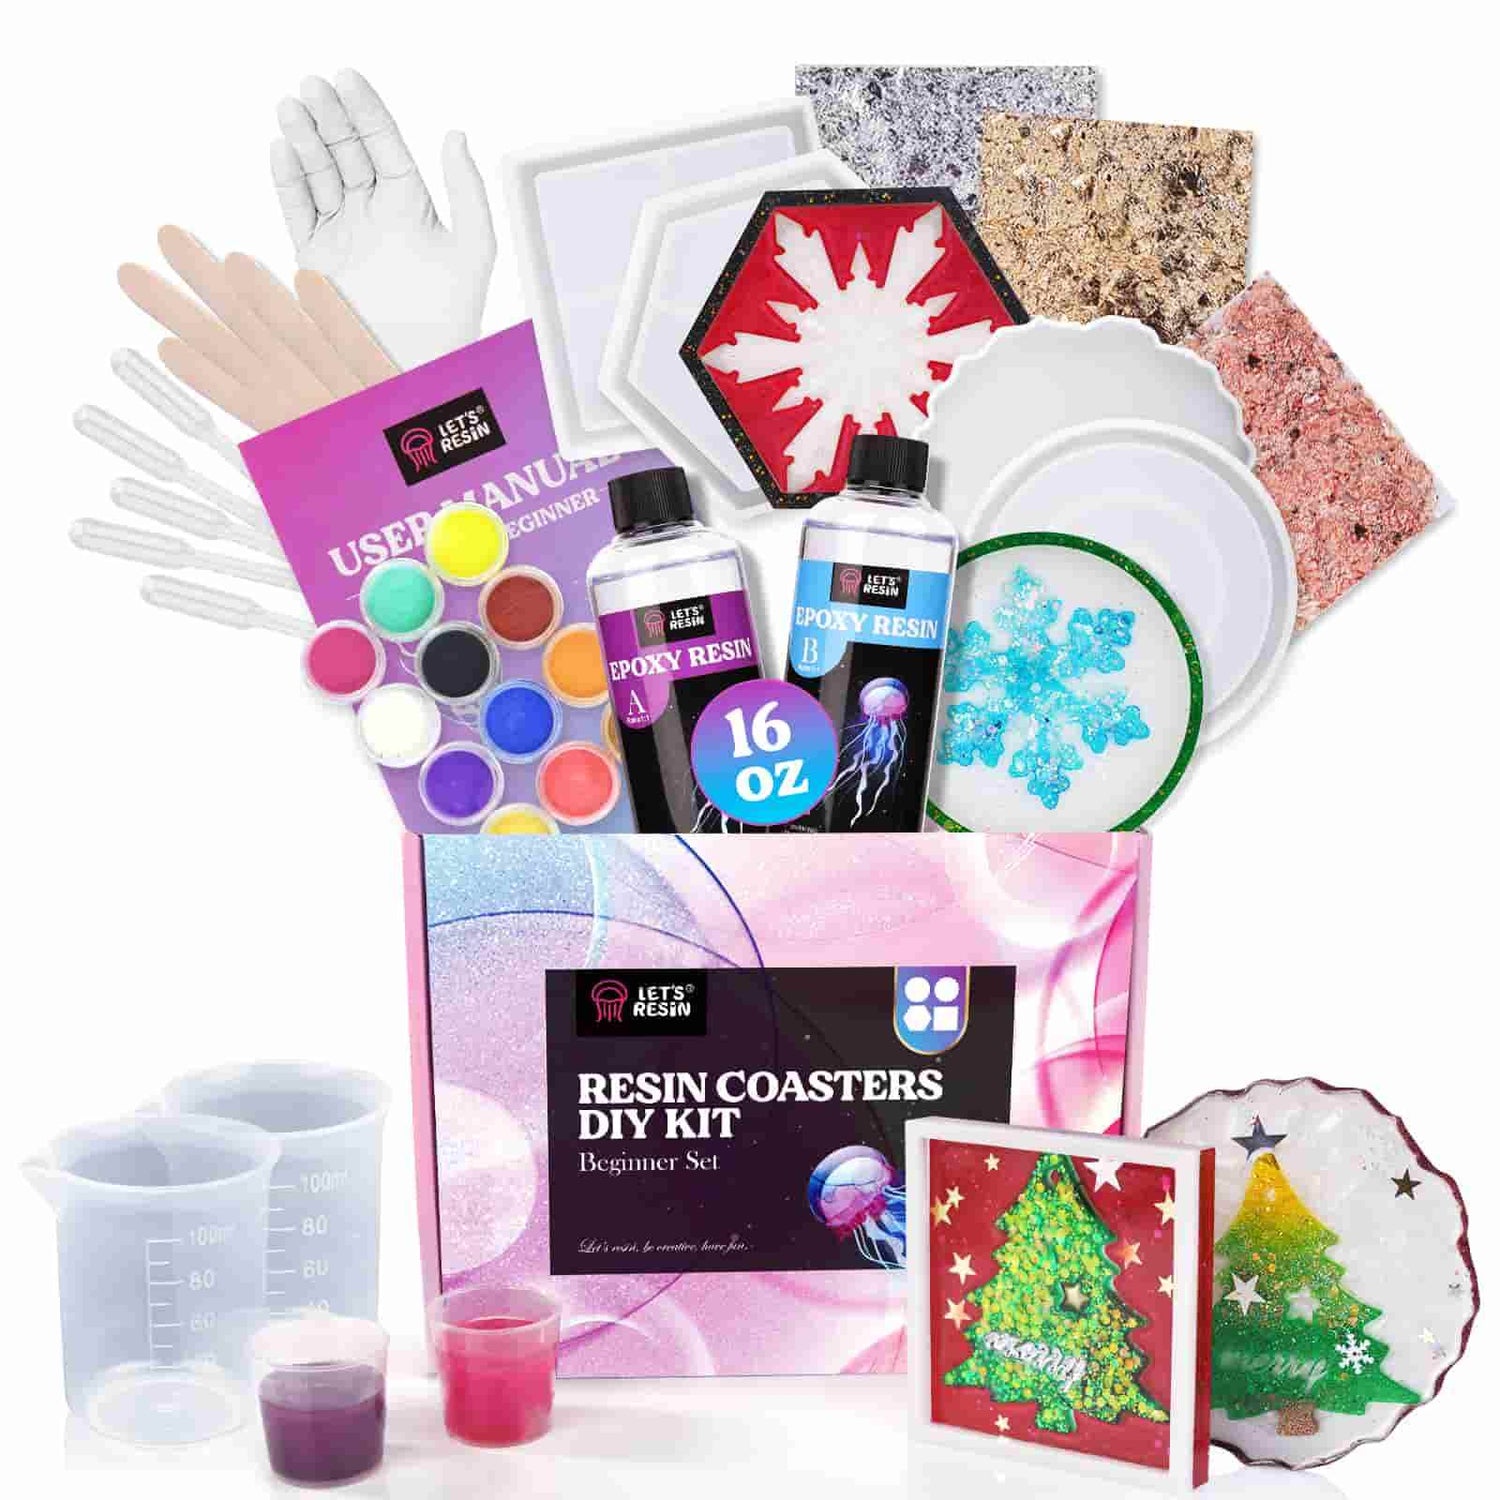 Resin Kit with EVERYTHING, Coaster Set - 40 Pcs 4 molds+resin+12